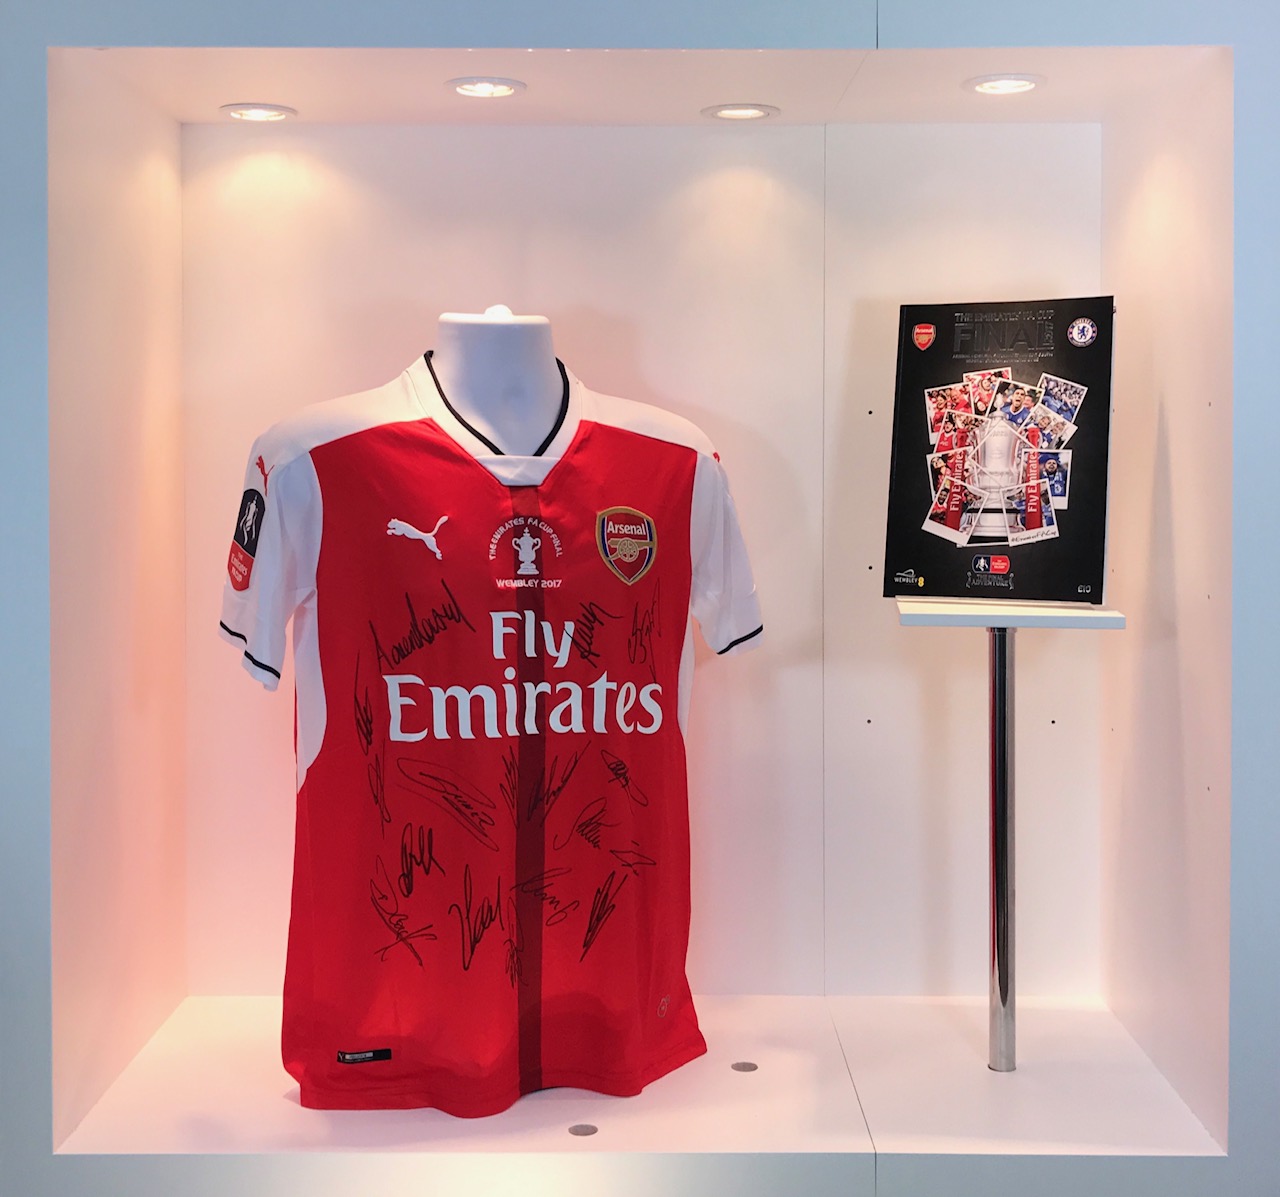 Arsenal FA Cup Final shirt and pennant, LONDON, ENGLAND - M…